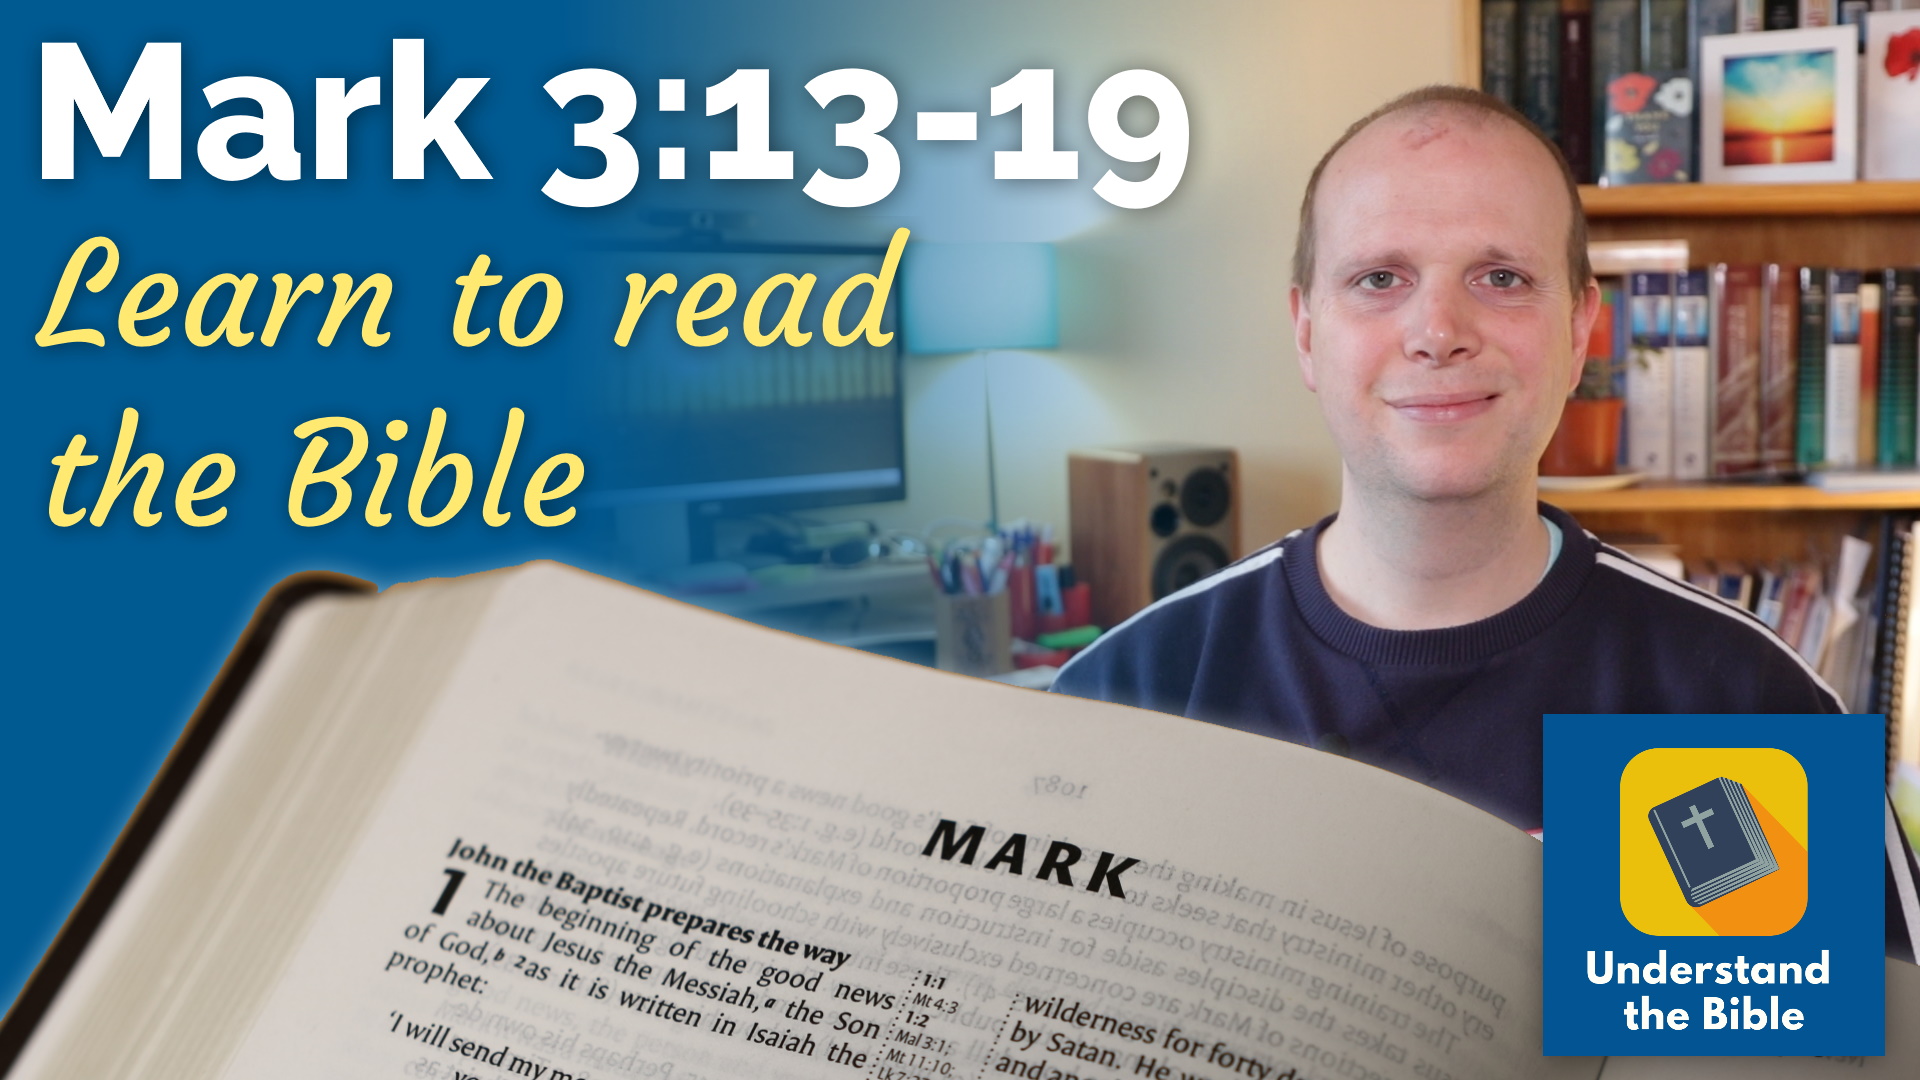 Mark 3:13-19 – Learn to read the Bible #12